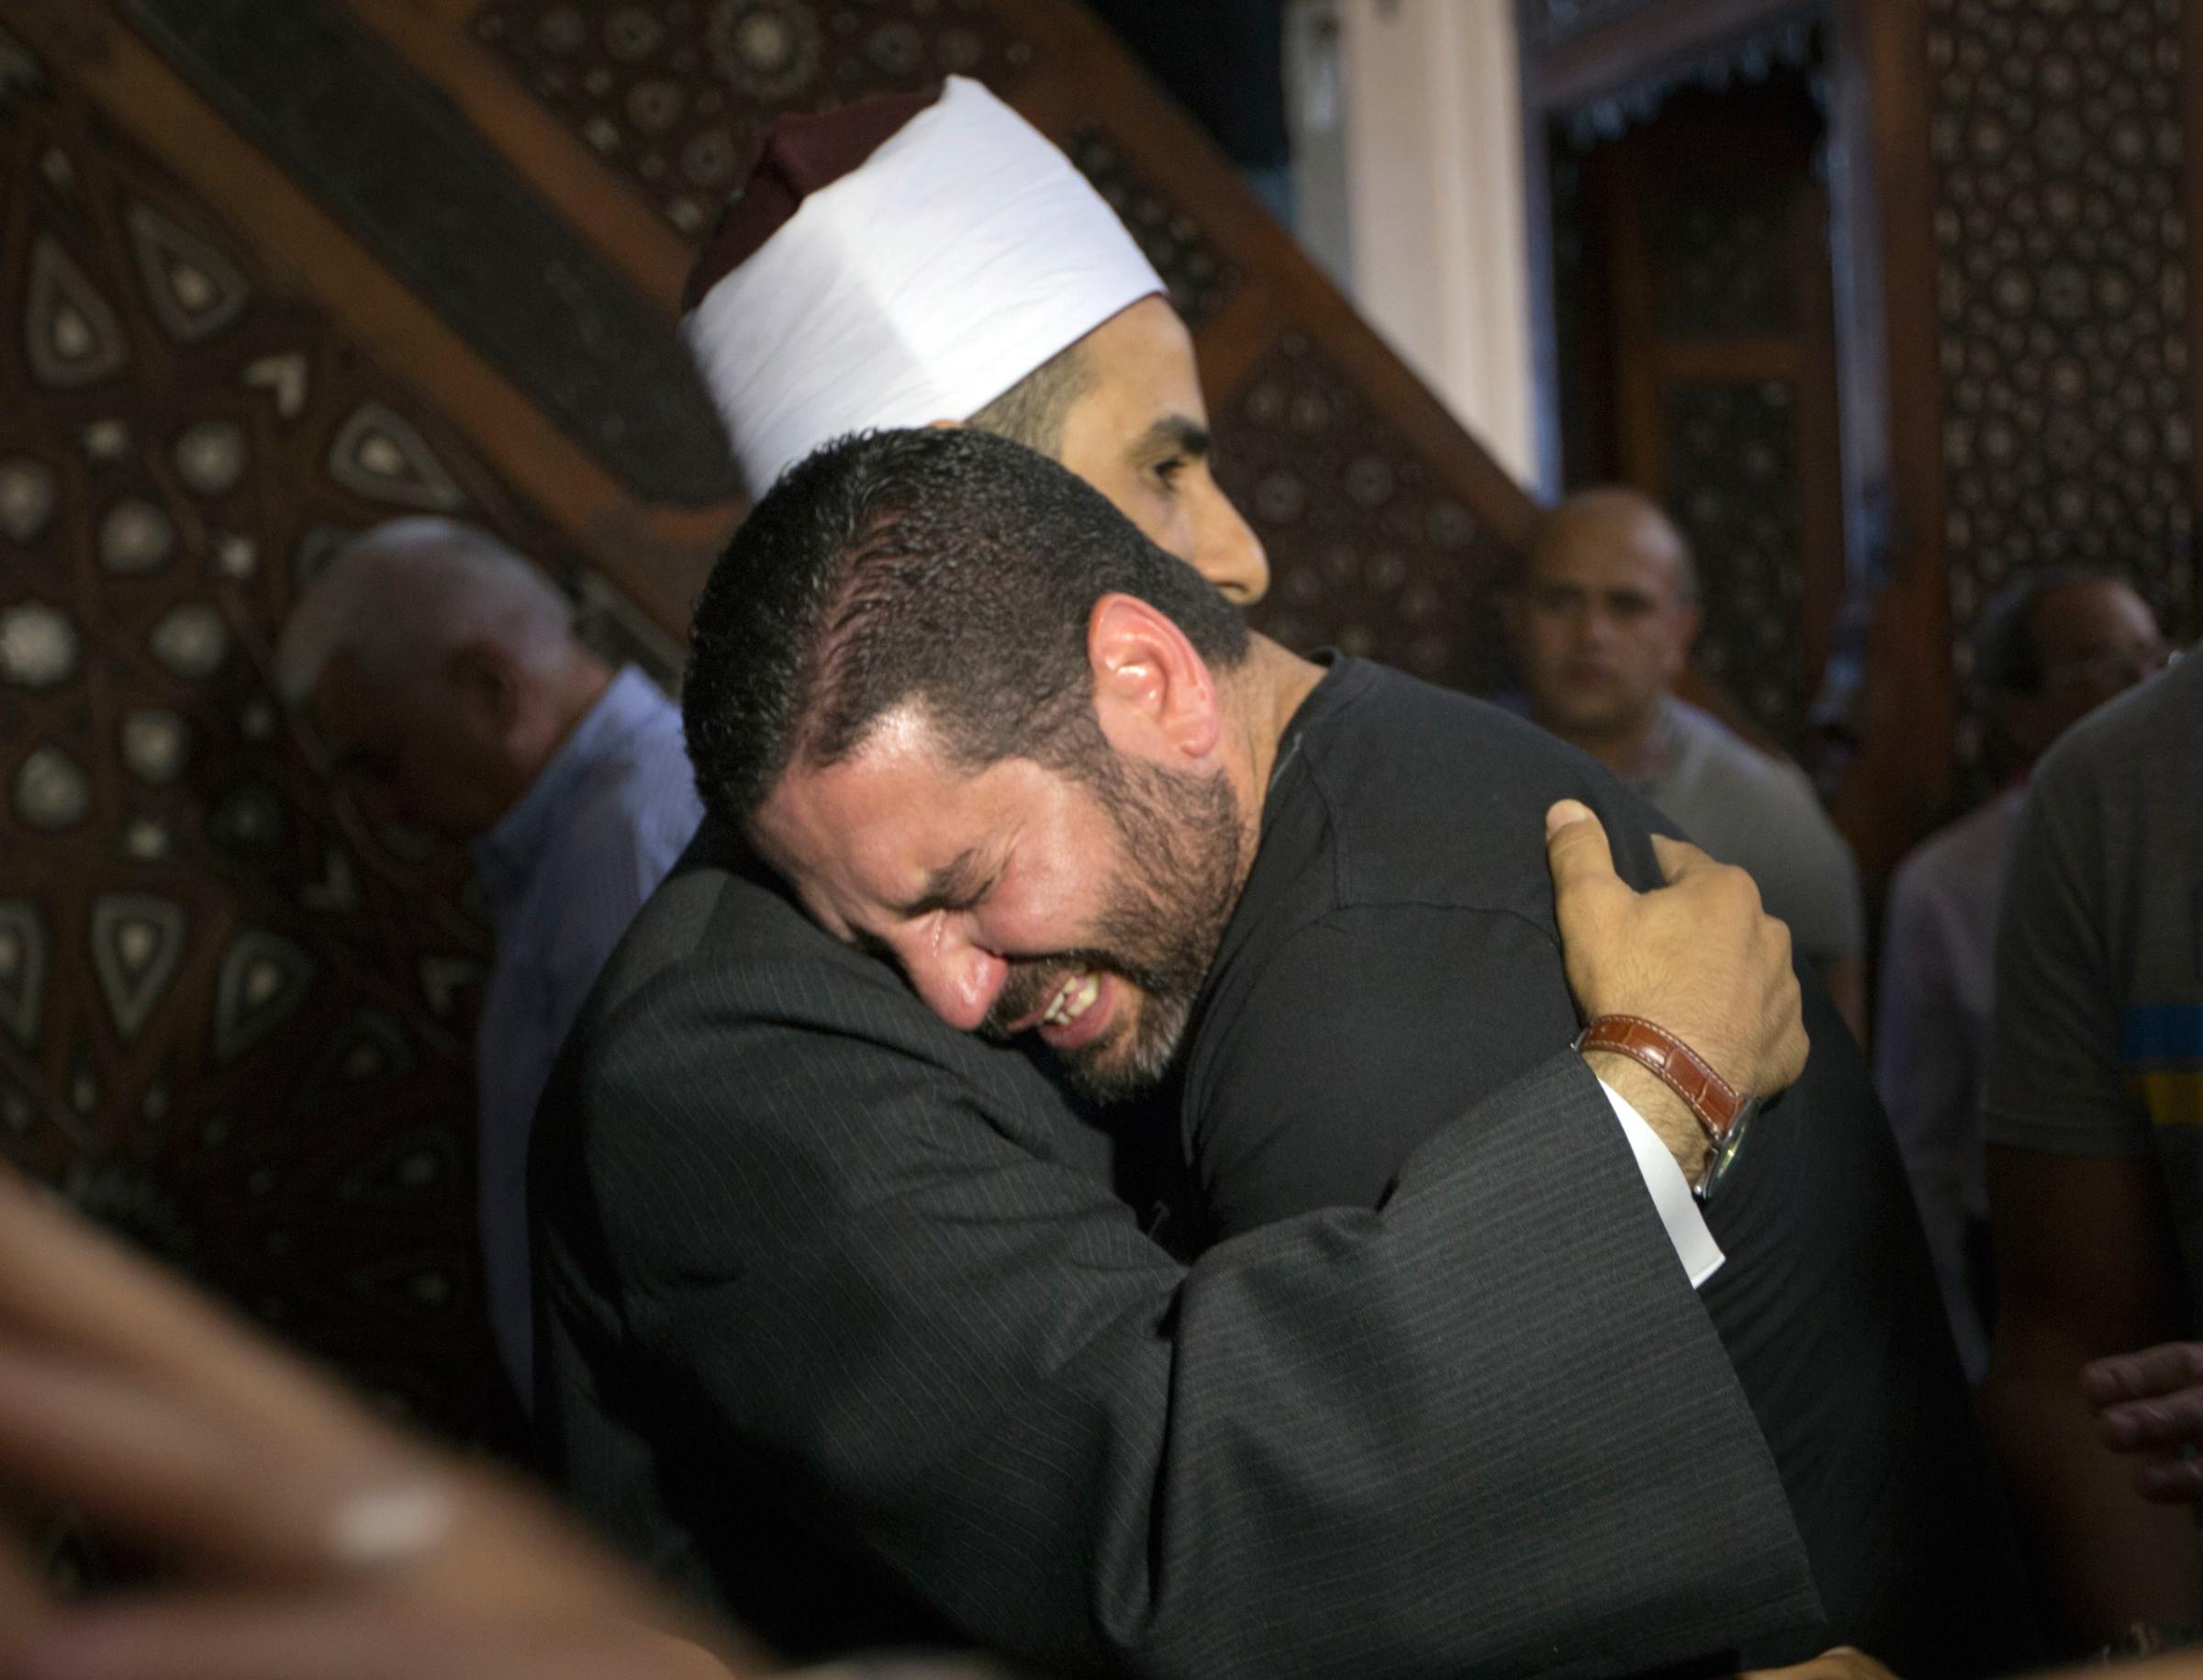 The Imam of al Thawrah Mosque, Samir Abdel Bary, gives condolences to film director Osman Abu Laban, center, who lost four relatives, all victims of Thursday's EgyptAir plane crash, following prayers for the dead, at al Thawrah Mosque, in Cairo, Egypt, Friday, May 20, 2016. The Airbus A320 plane was flying from Paris to Cairo when it disappeared early Thursday over the sea. (AP Photo/Amr Nabil)